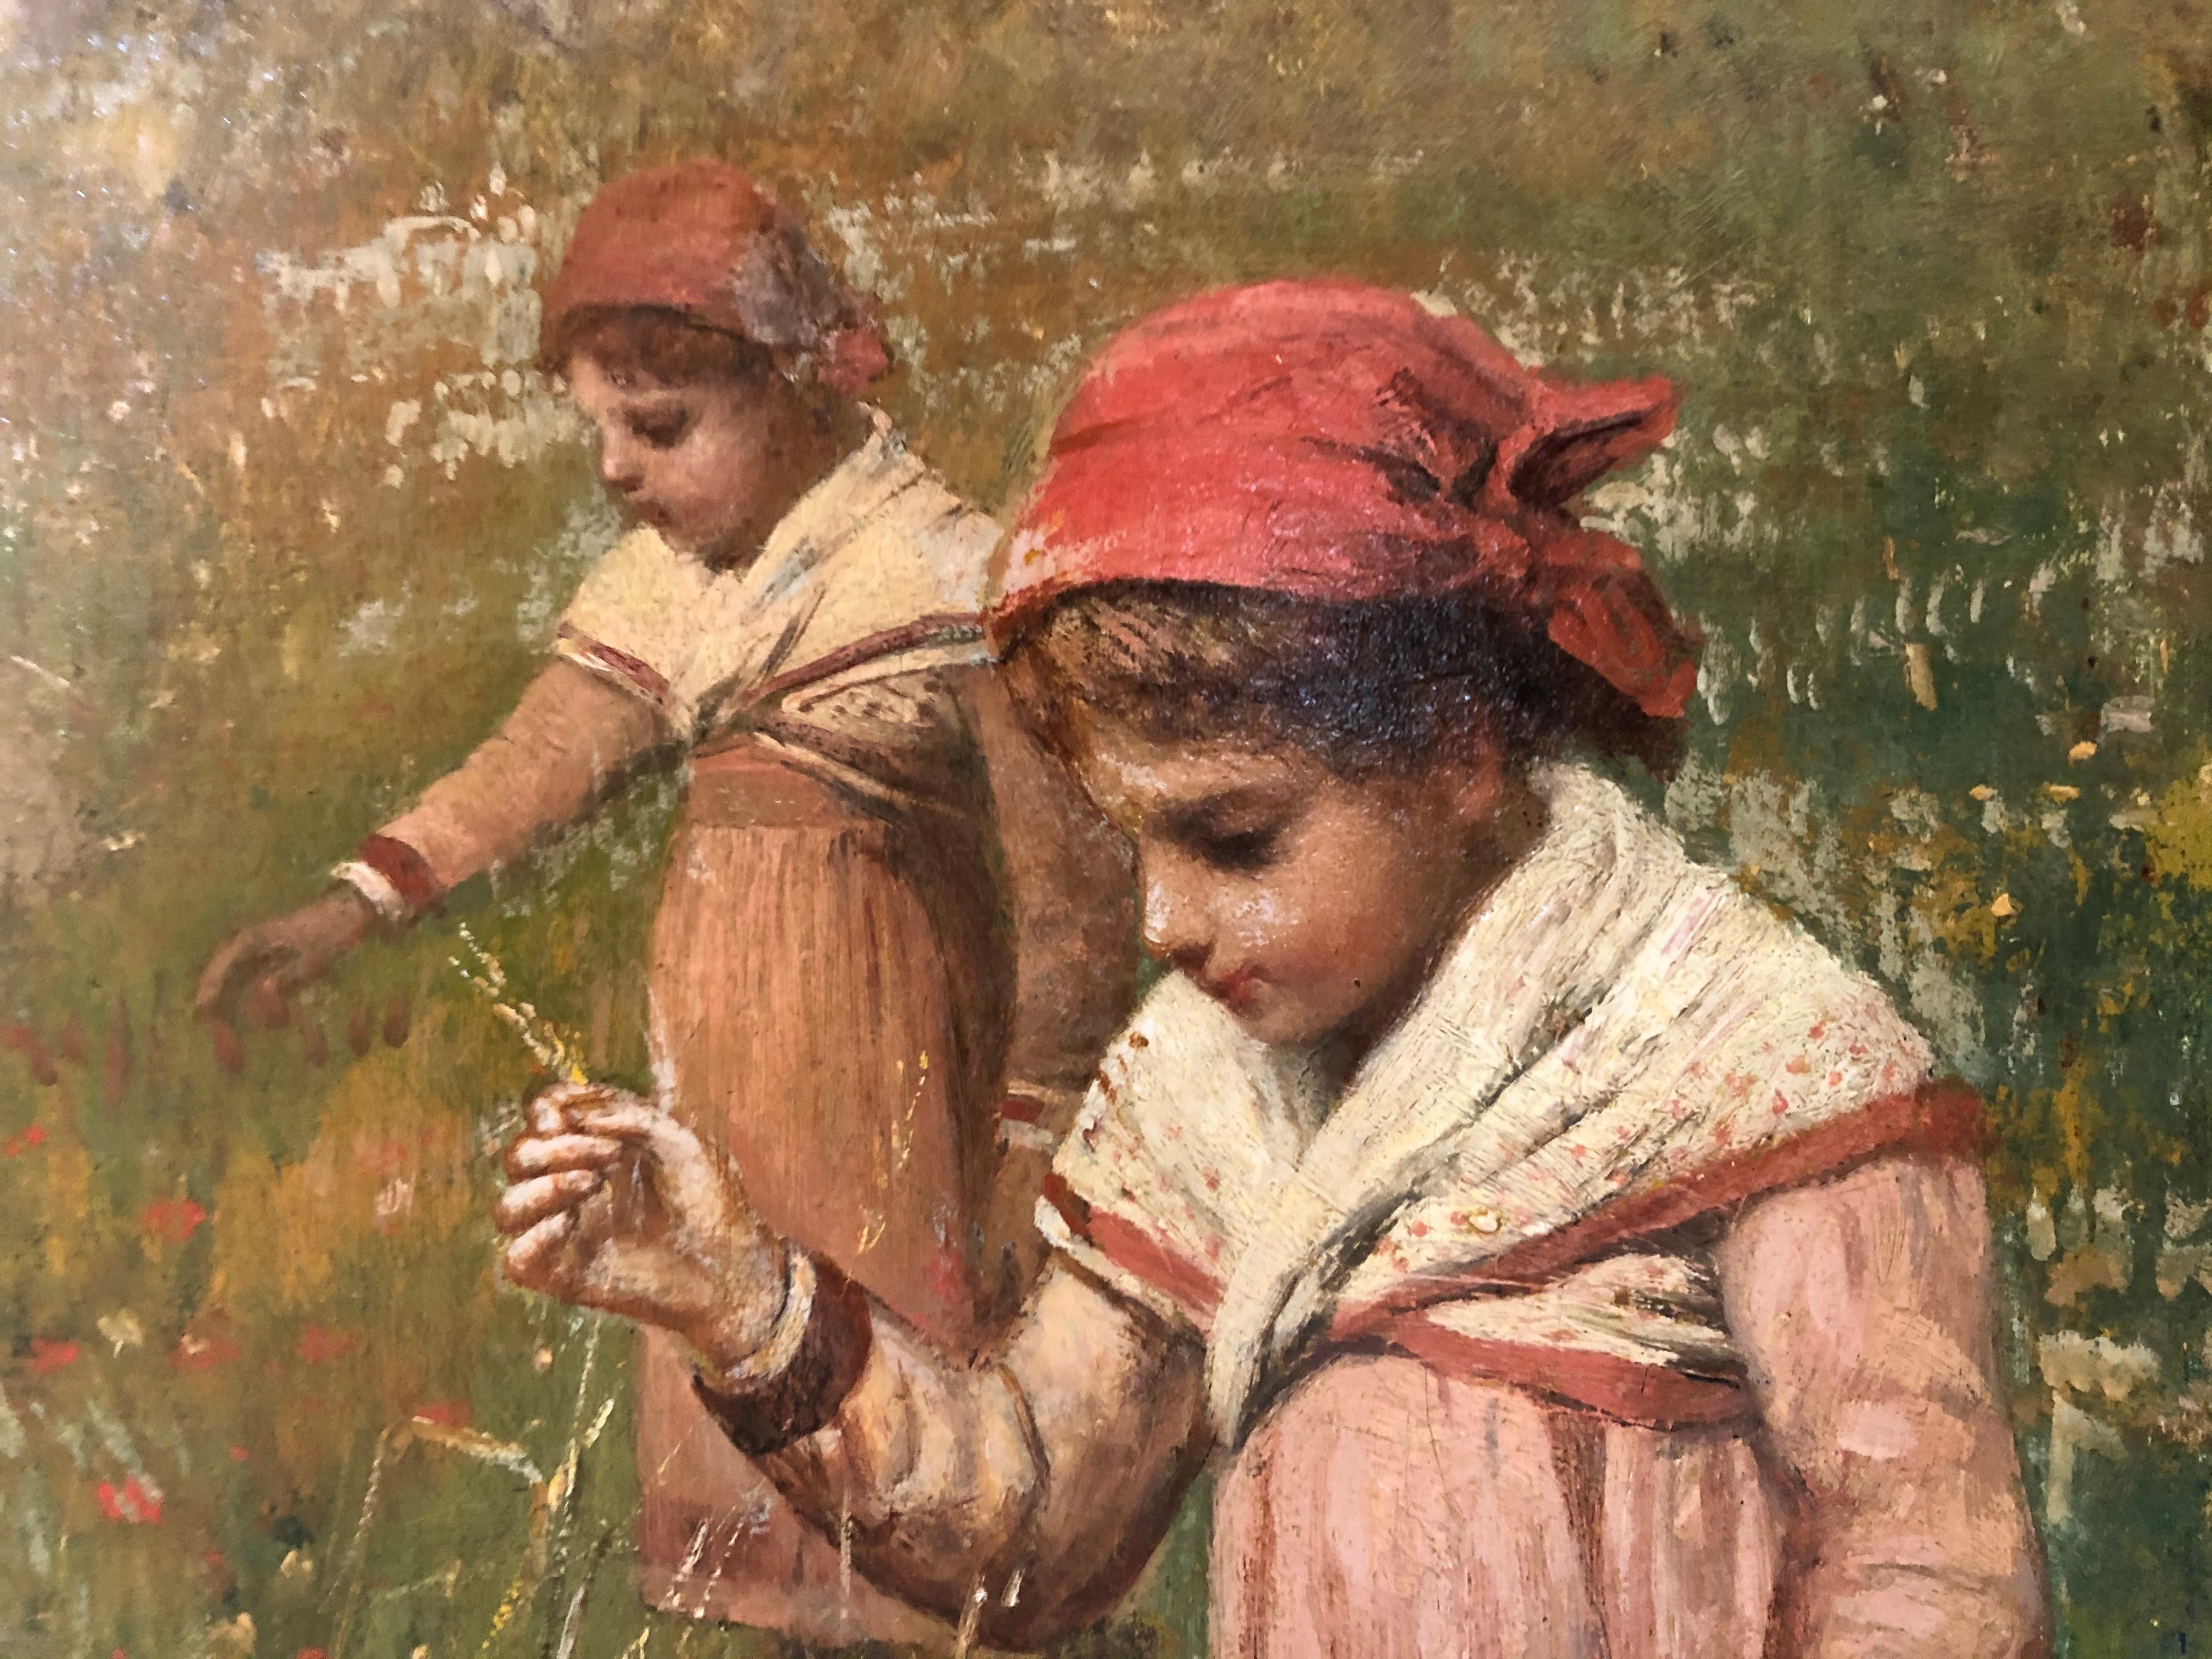 The Twins in the Field - Painting by James Wells Champney